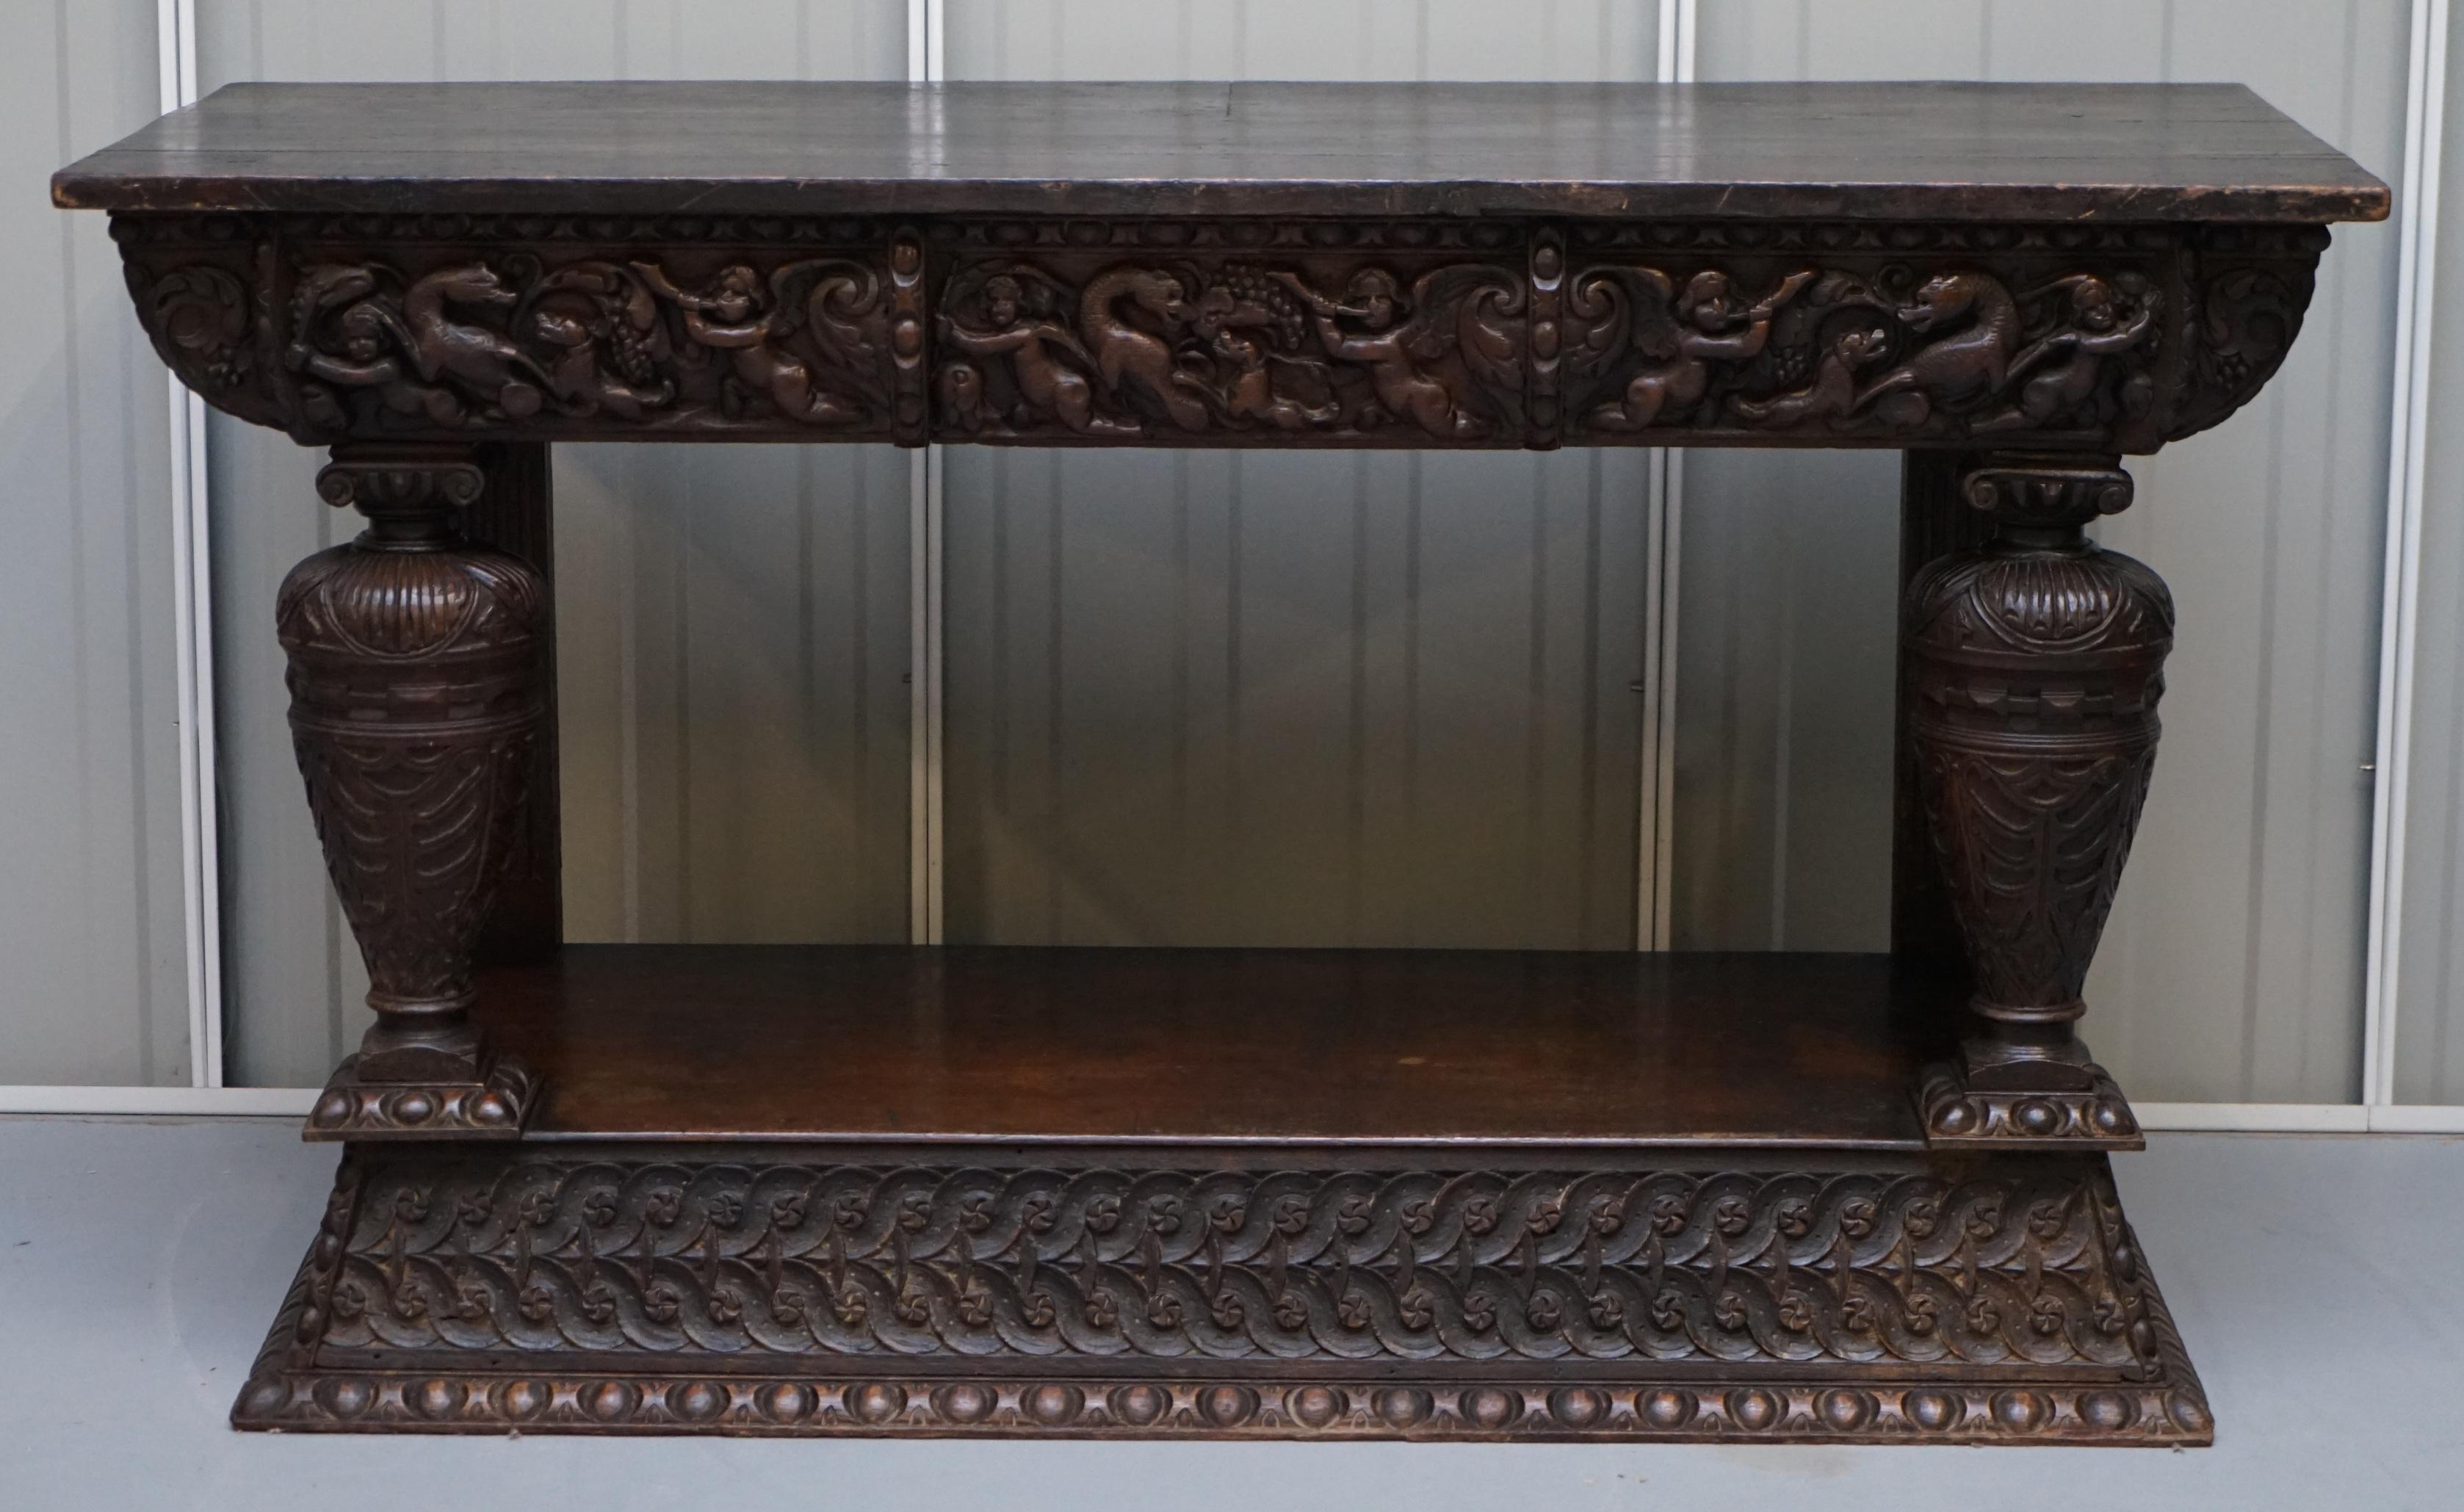 We are delighted to offer for sale this stunning and very rare 17th century hand carved Italian console or serving table

A very good looking and decorative piece of Italian furniture. It is hand carved all over, you can see Cherub Angels playing